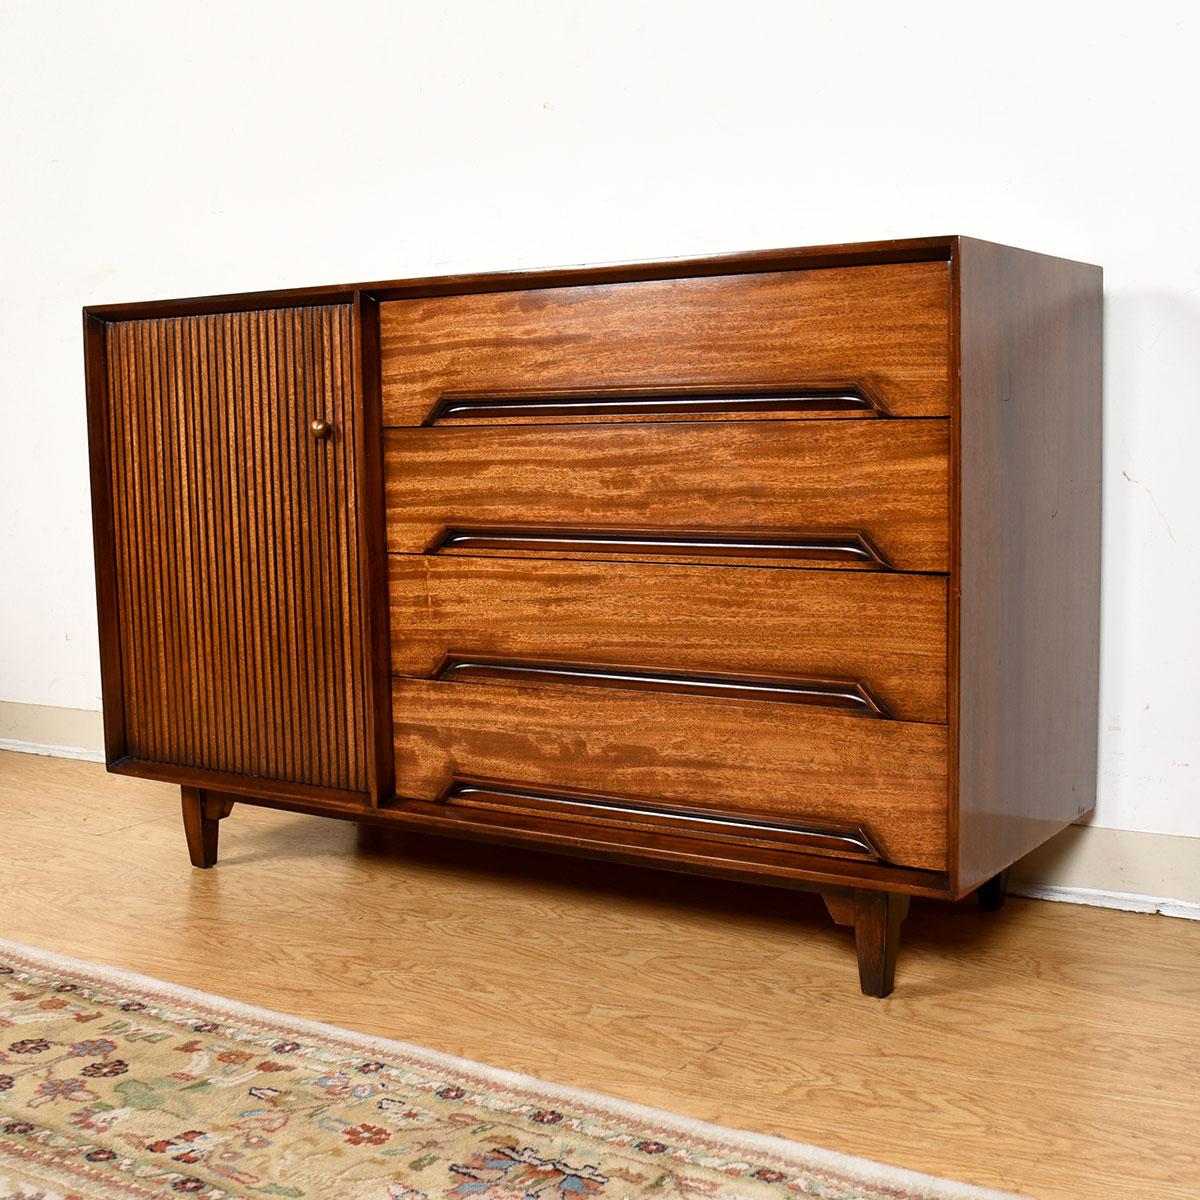 Exotic Mindoro Wood Cabinet by Milo Baughman for Drexel Perspective, 1951

Additional Information:
Material: Wood
Featured at Kensington:
Four drawers, each having a sculpted pull along the bottom edge outlined in darker wood
Door on the left